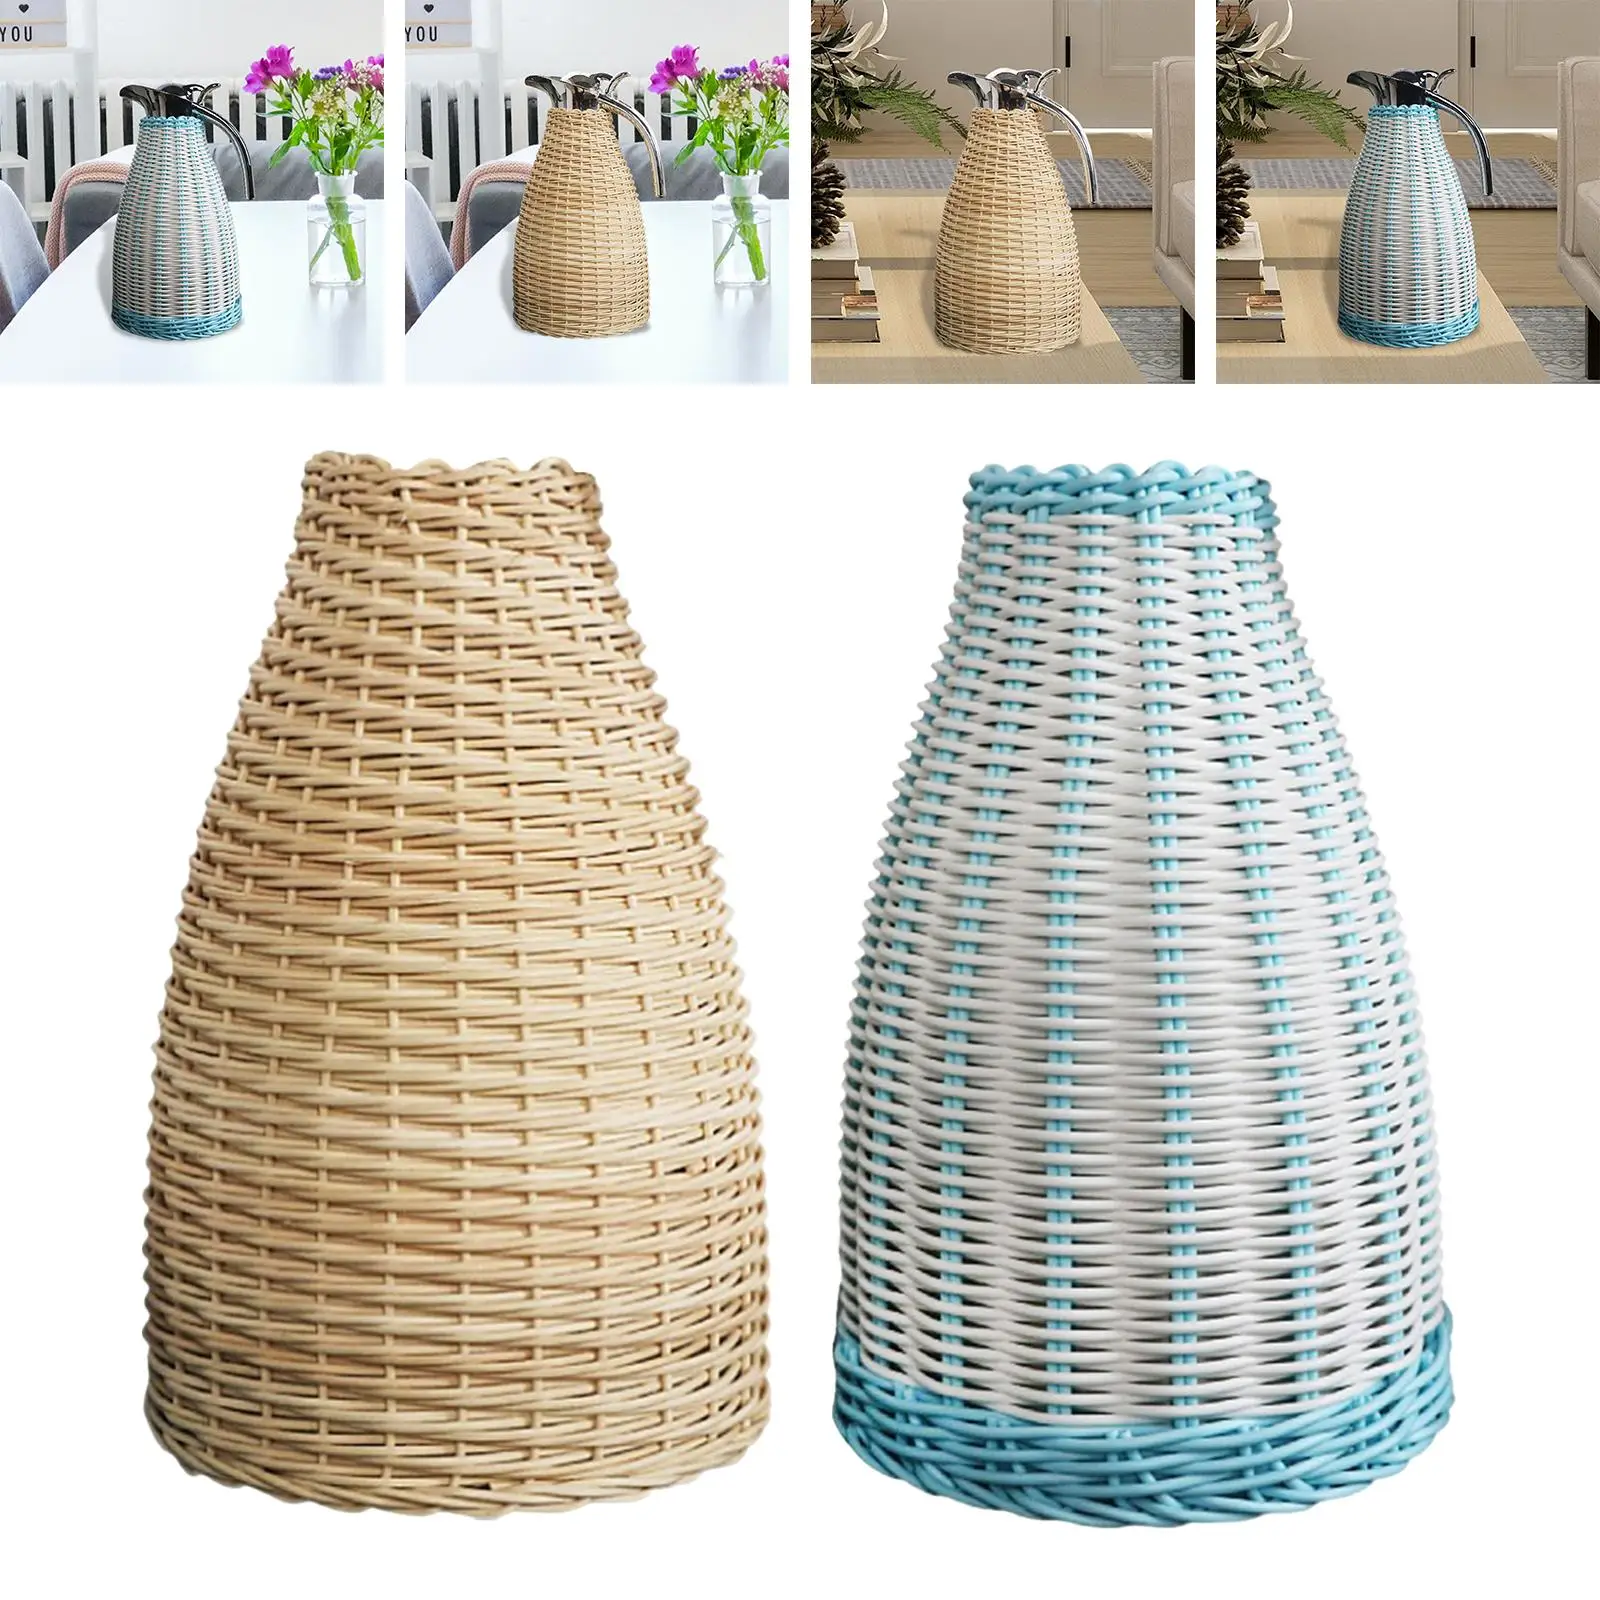 Water Bottle pouch Rustic Thermal Jug Decorative Home Decoration Bottle slings Holder for Windows Chairs Sidings Roofs